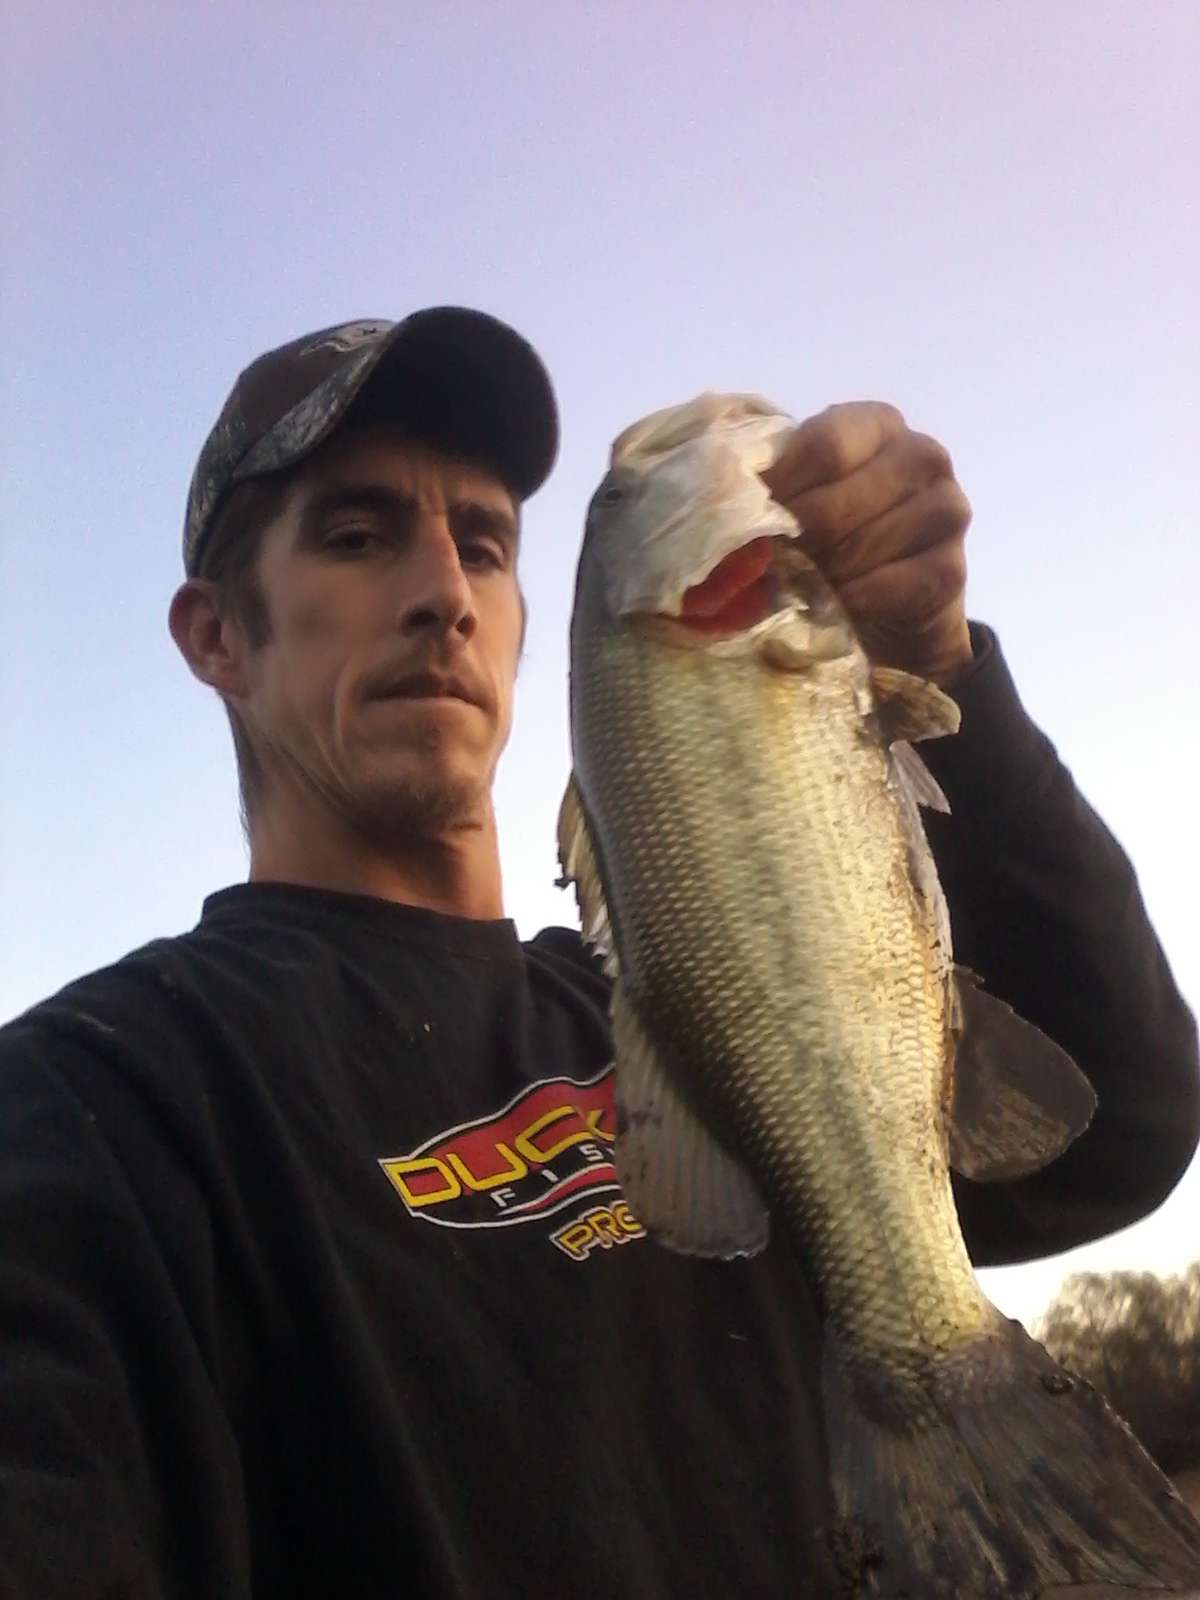 Latest Catch Pics Thread - Page 68 - Fishing Reports - Bass